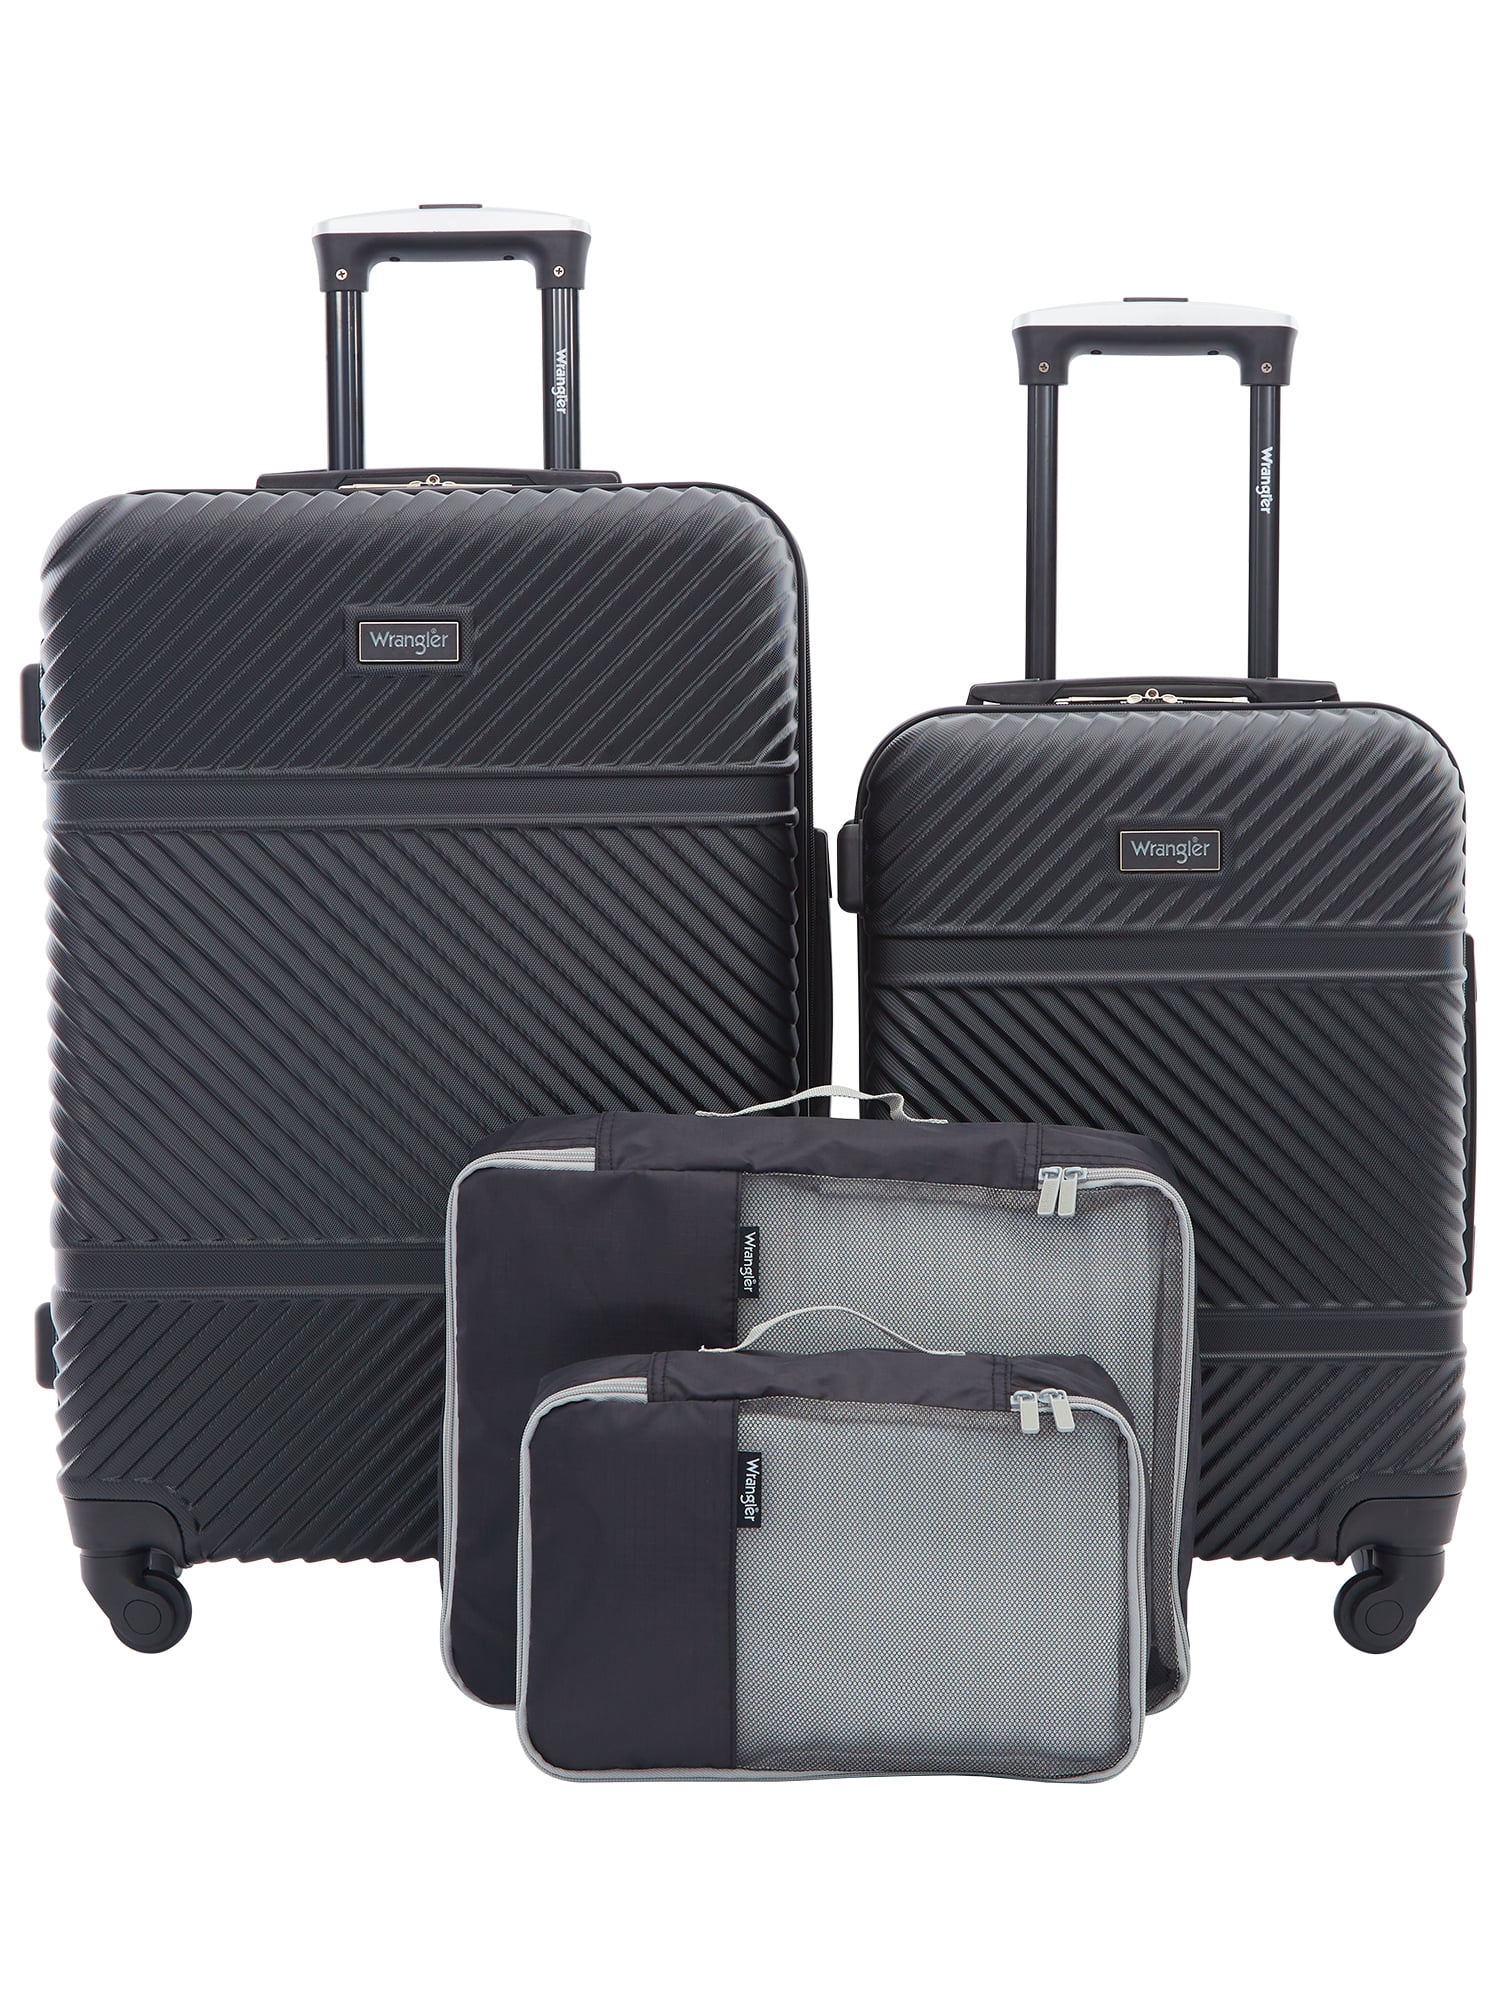 Wrangler 4 PC Hardside Spinner Luggage Set with 20 and 25 Suitcases and Packing Cubes, Black